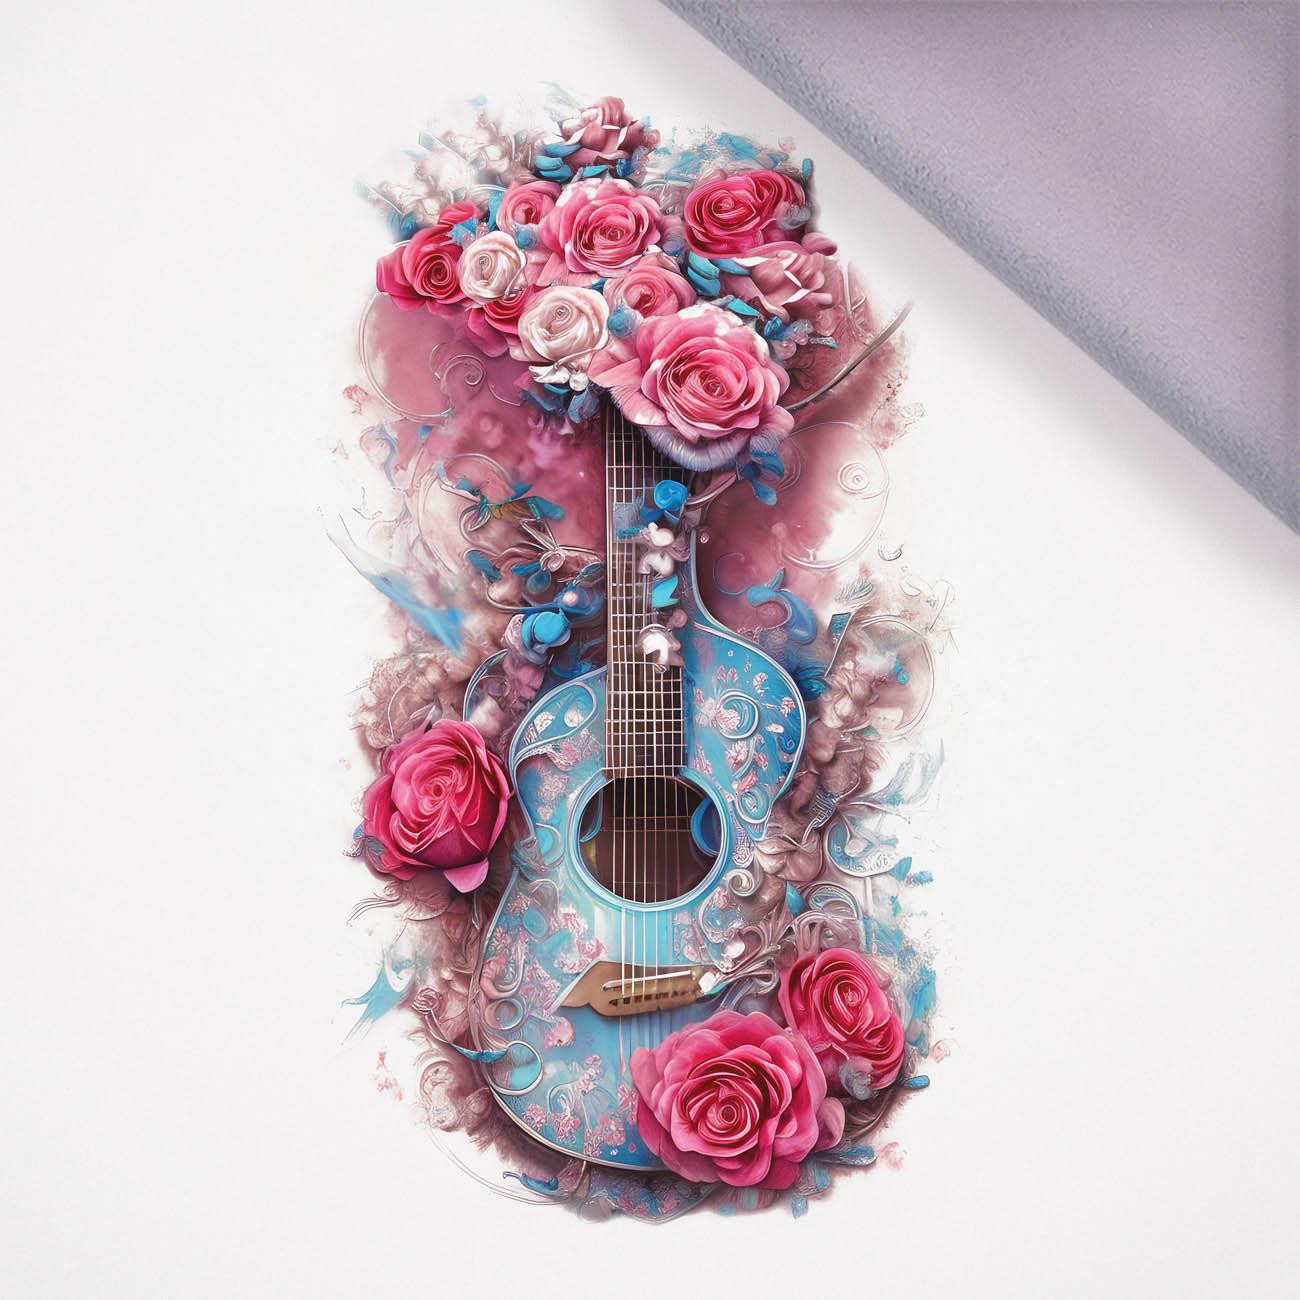 GUITAR WITH ROSES - panel (75cm x 80cm)  softshell 